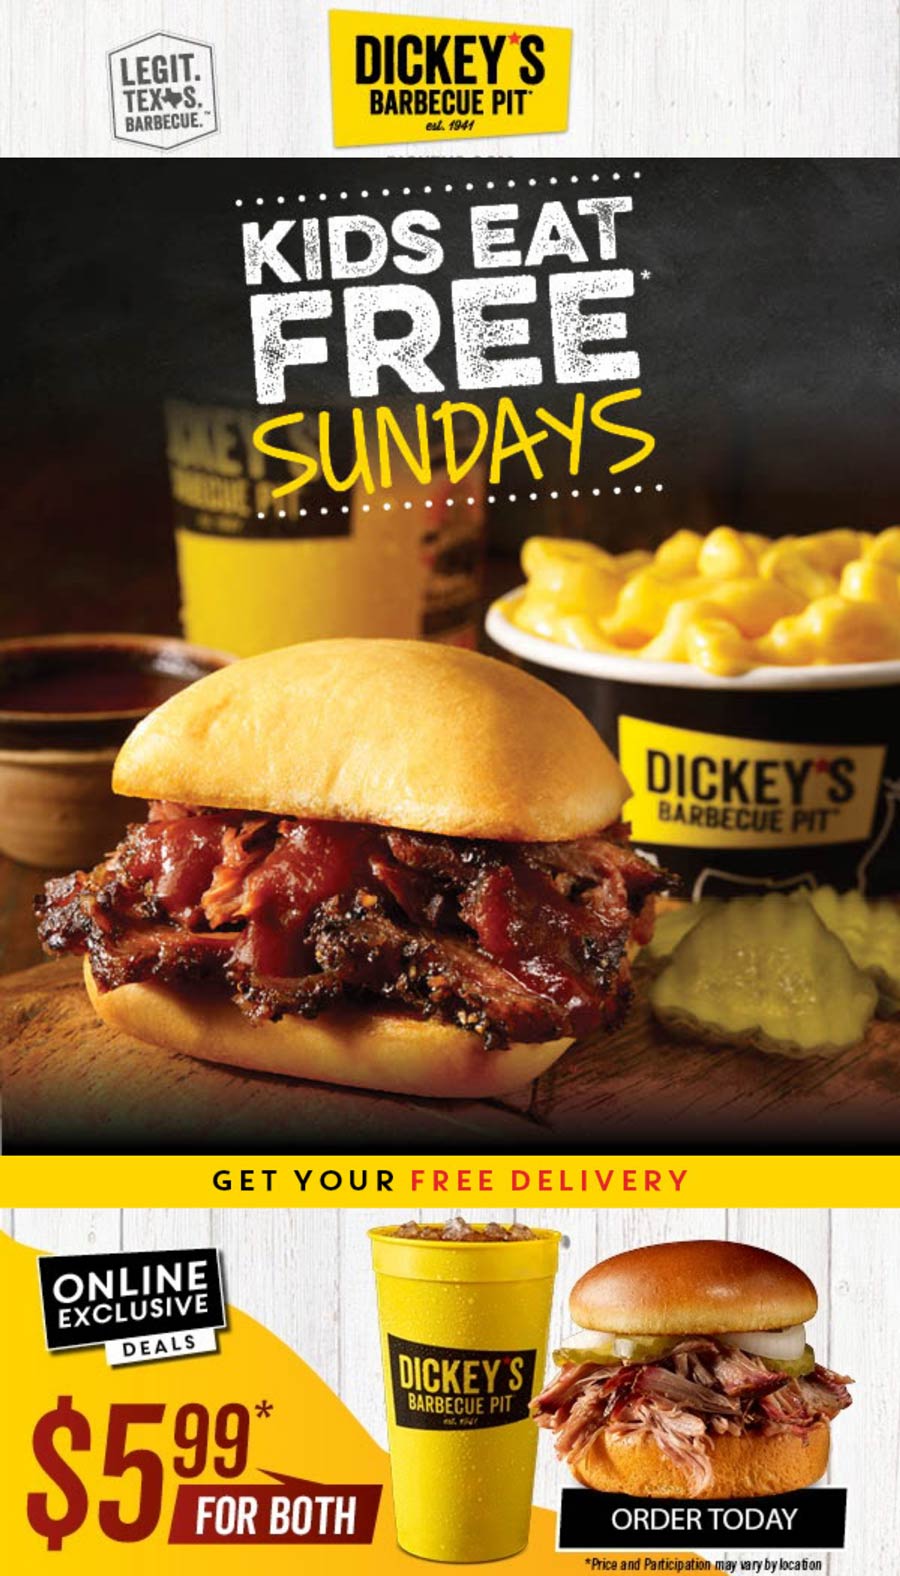 Dickeys Barbecue Pit restaurants Coupon  Kids eat free today at Dickeys Barbecue Pit #dickeysbarbecuepit 